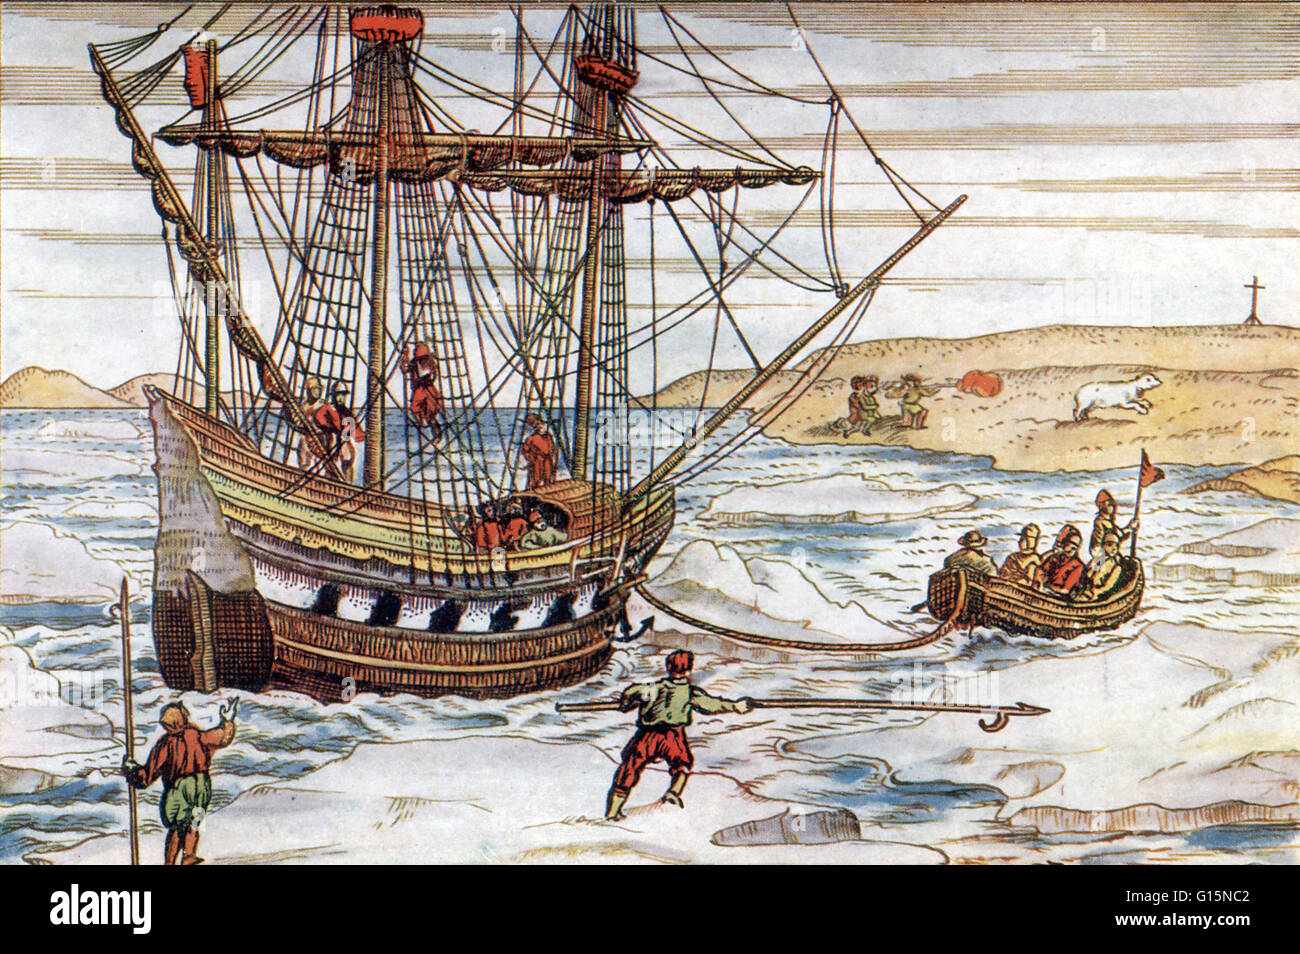 William Barents and his crew trapped in Arctic ice during their third expedition of 1596. Led by the Dutch navigator and explorer William Barents (c.1550-1597), the expedition attempted to find the Northeast Passage from the Atlantic to the Pacific. After Stock Photo